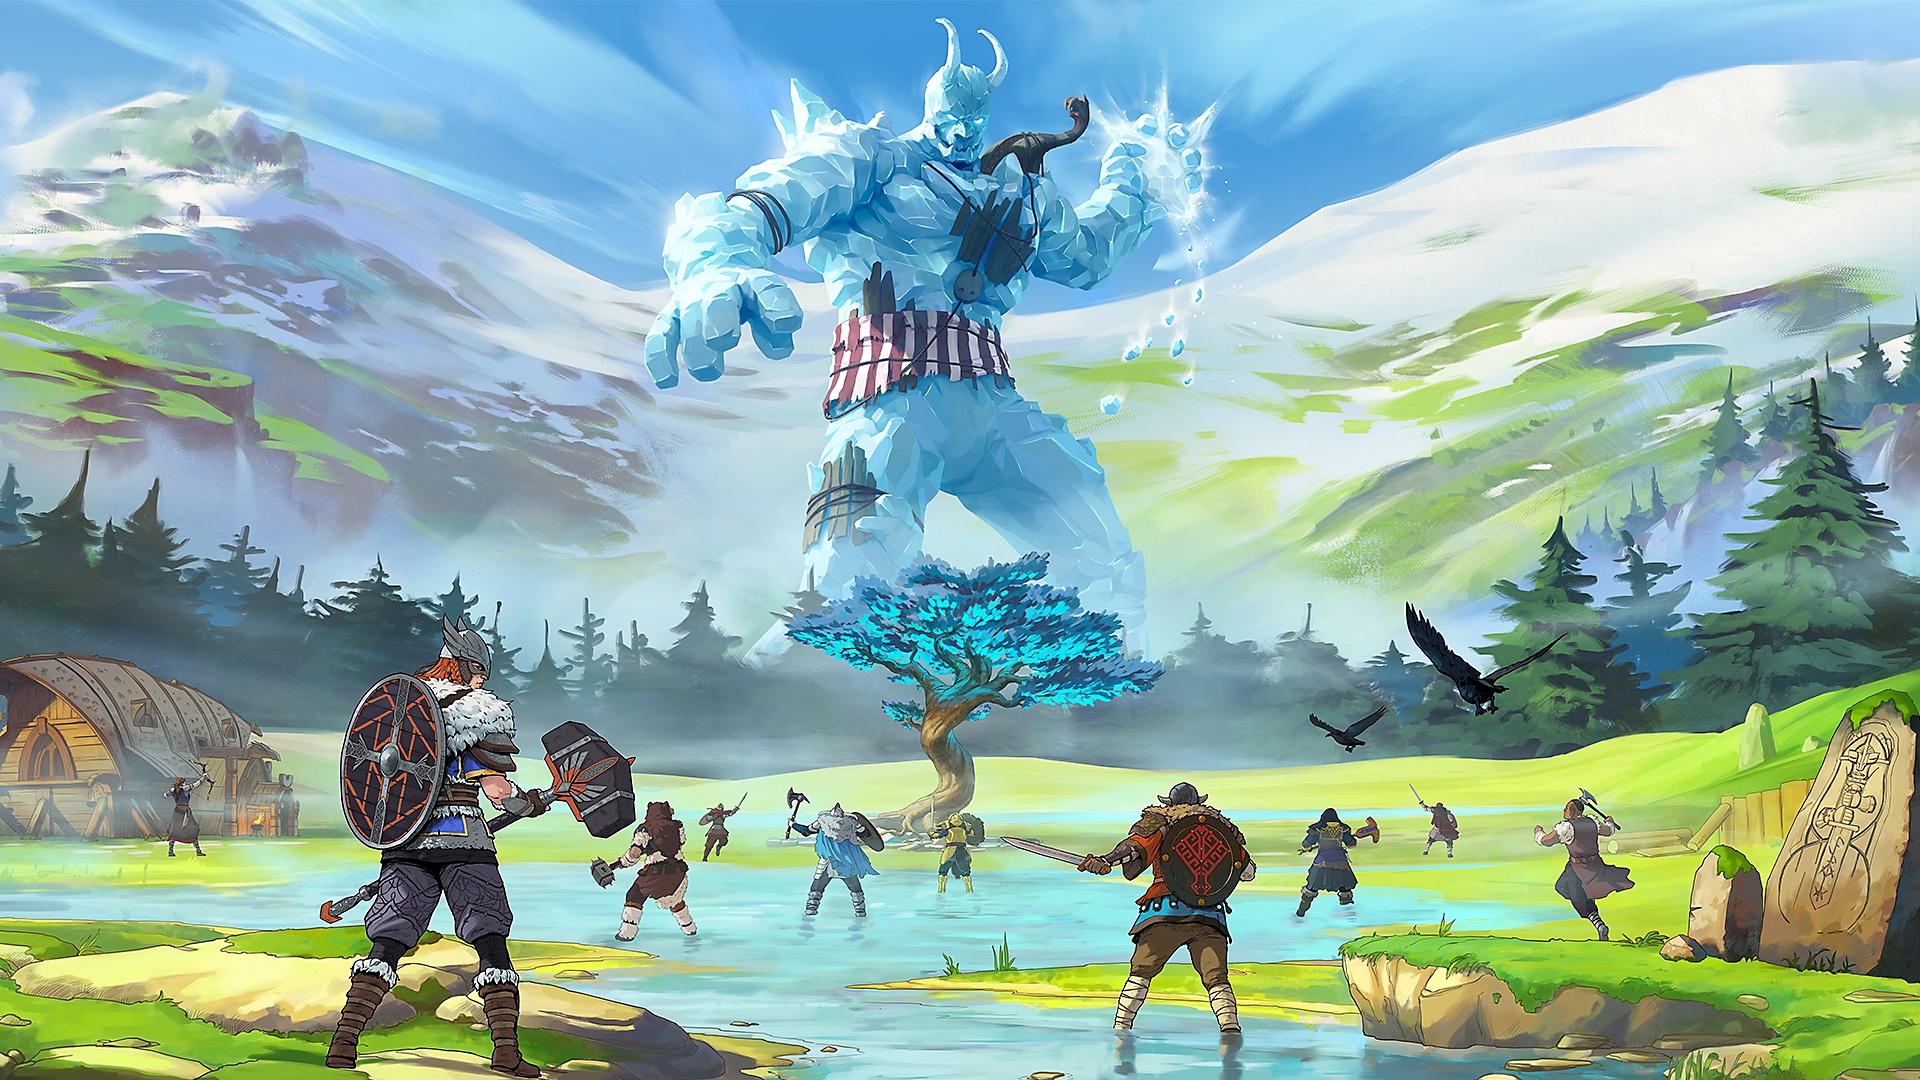 Tribes of Midgard key art of giant in the distance